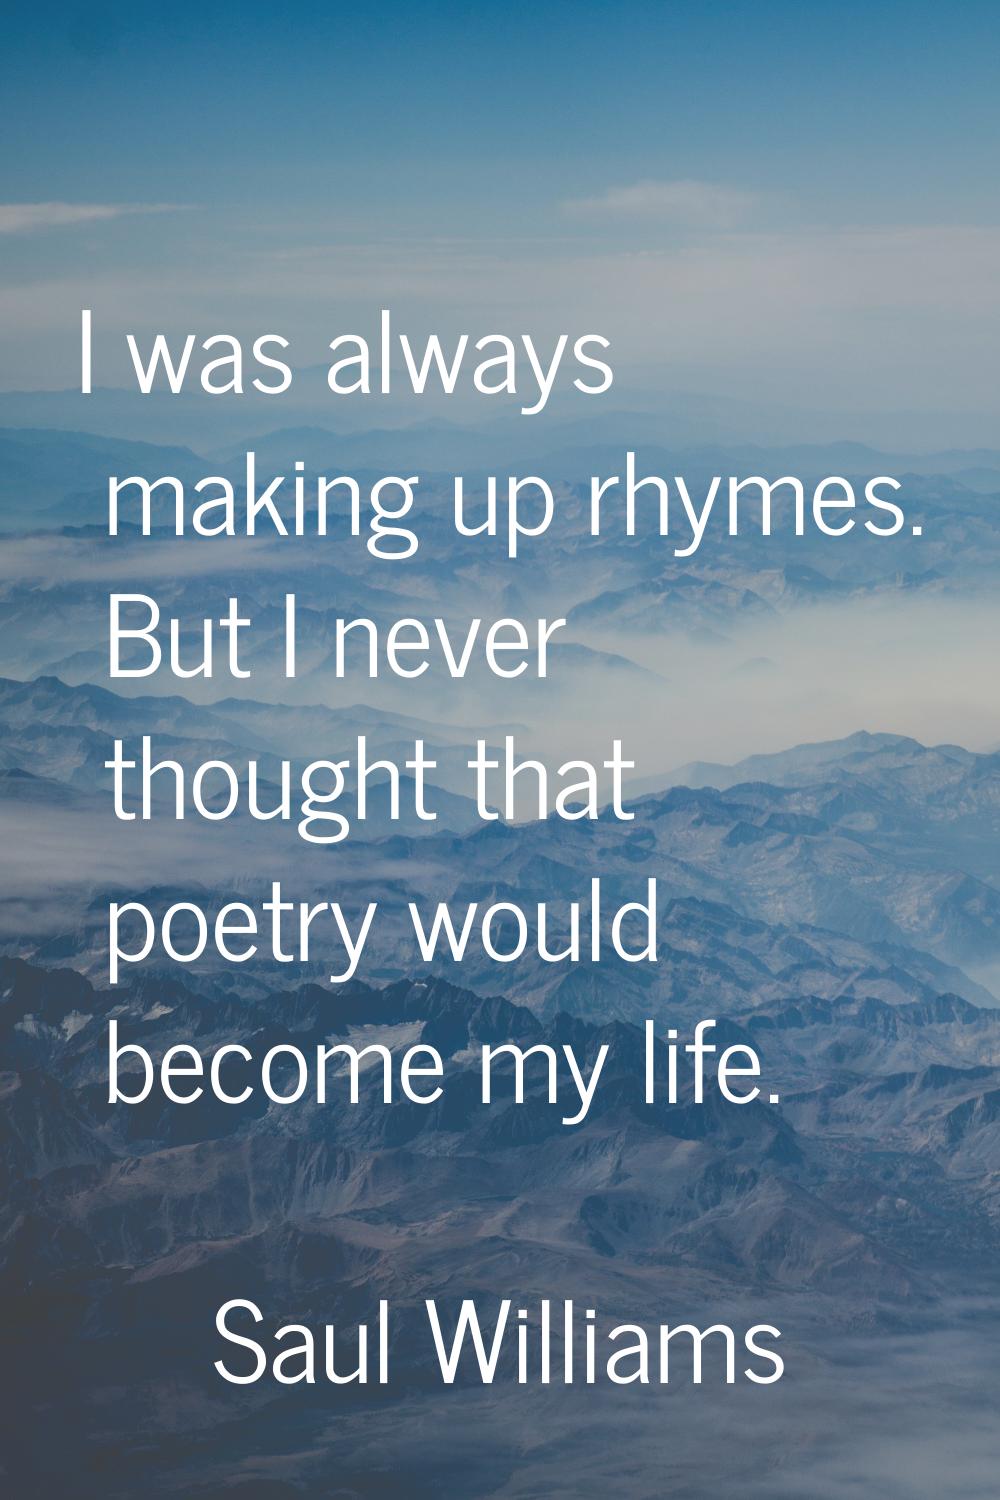 I was always making up rhymes. But I never thought that poetry would become my life.